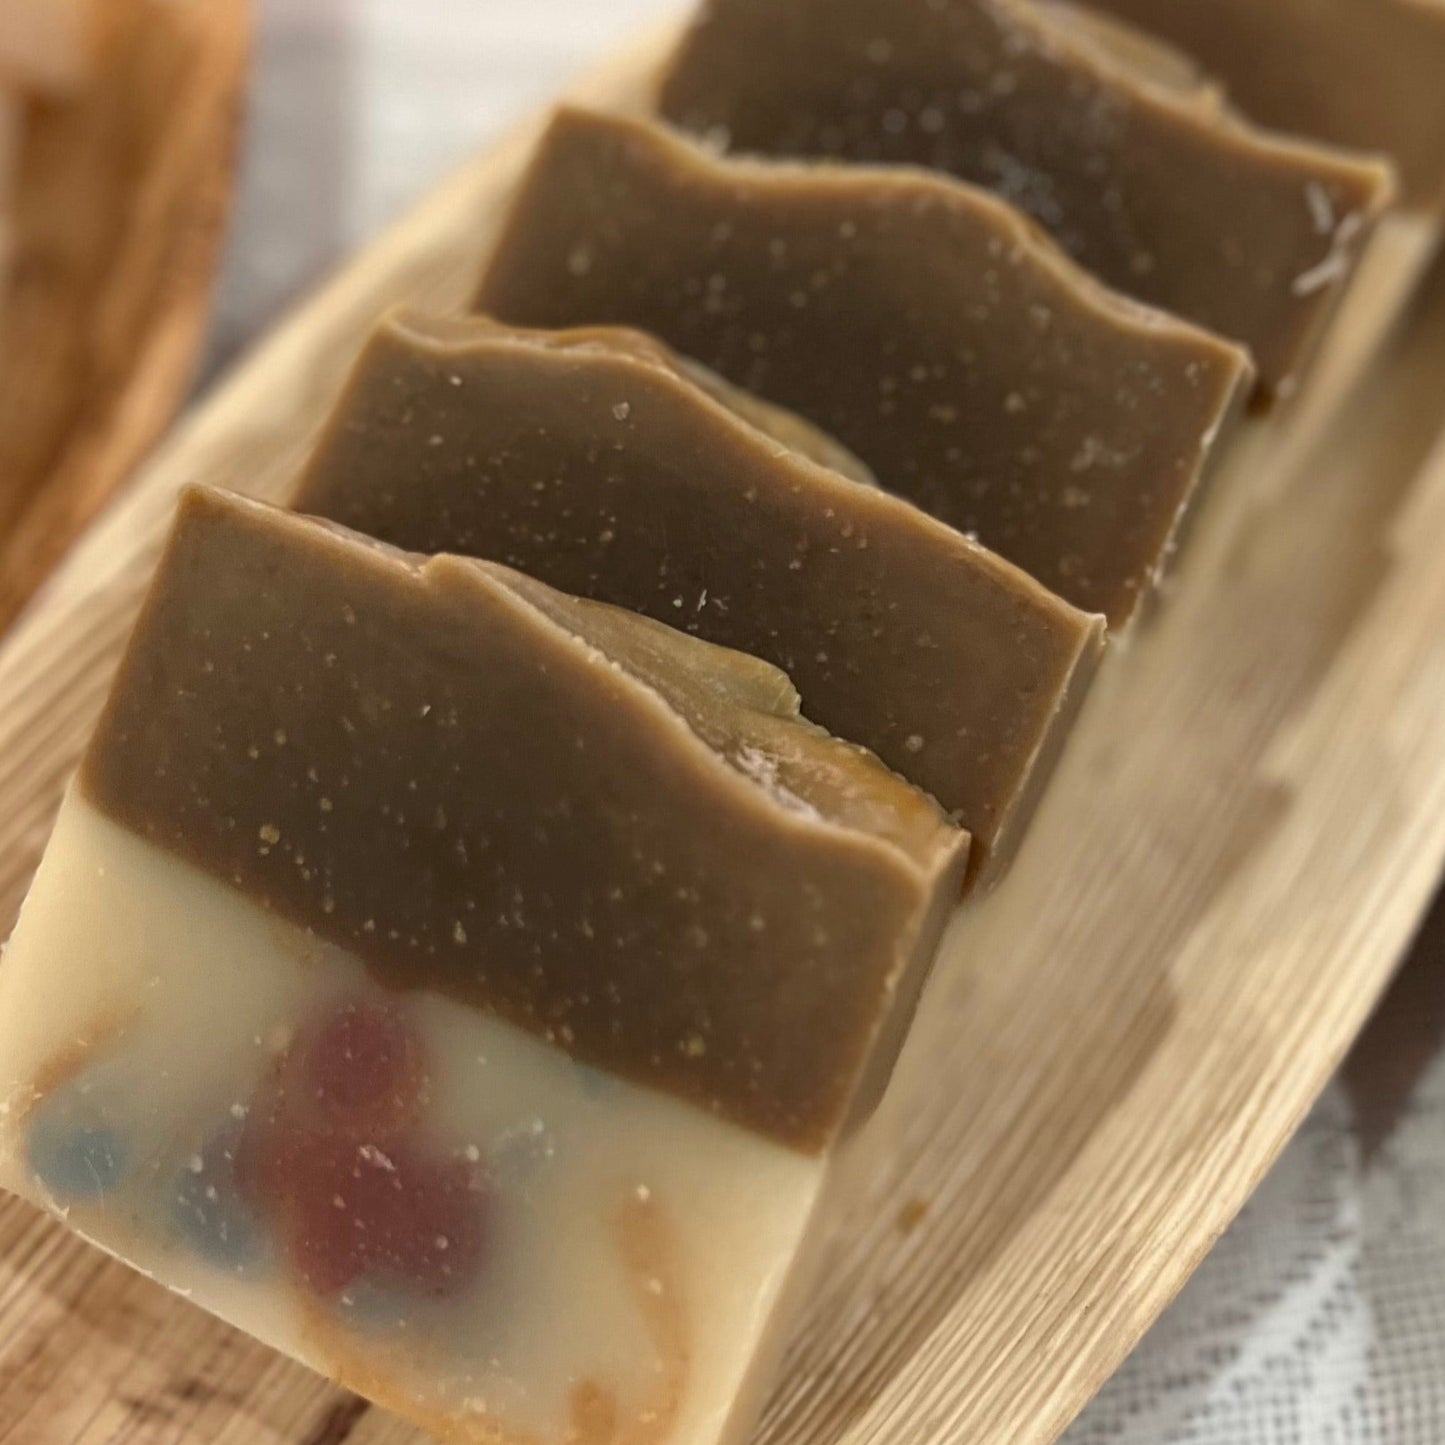 Summer Woods Cold Process Artisan Soap | 310 Soap + Skin - 310 Soap Company